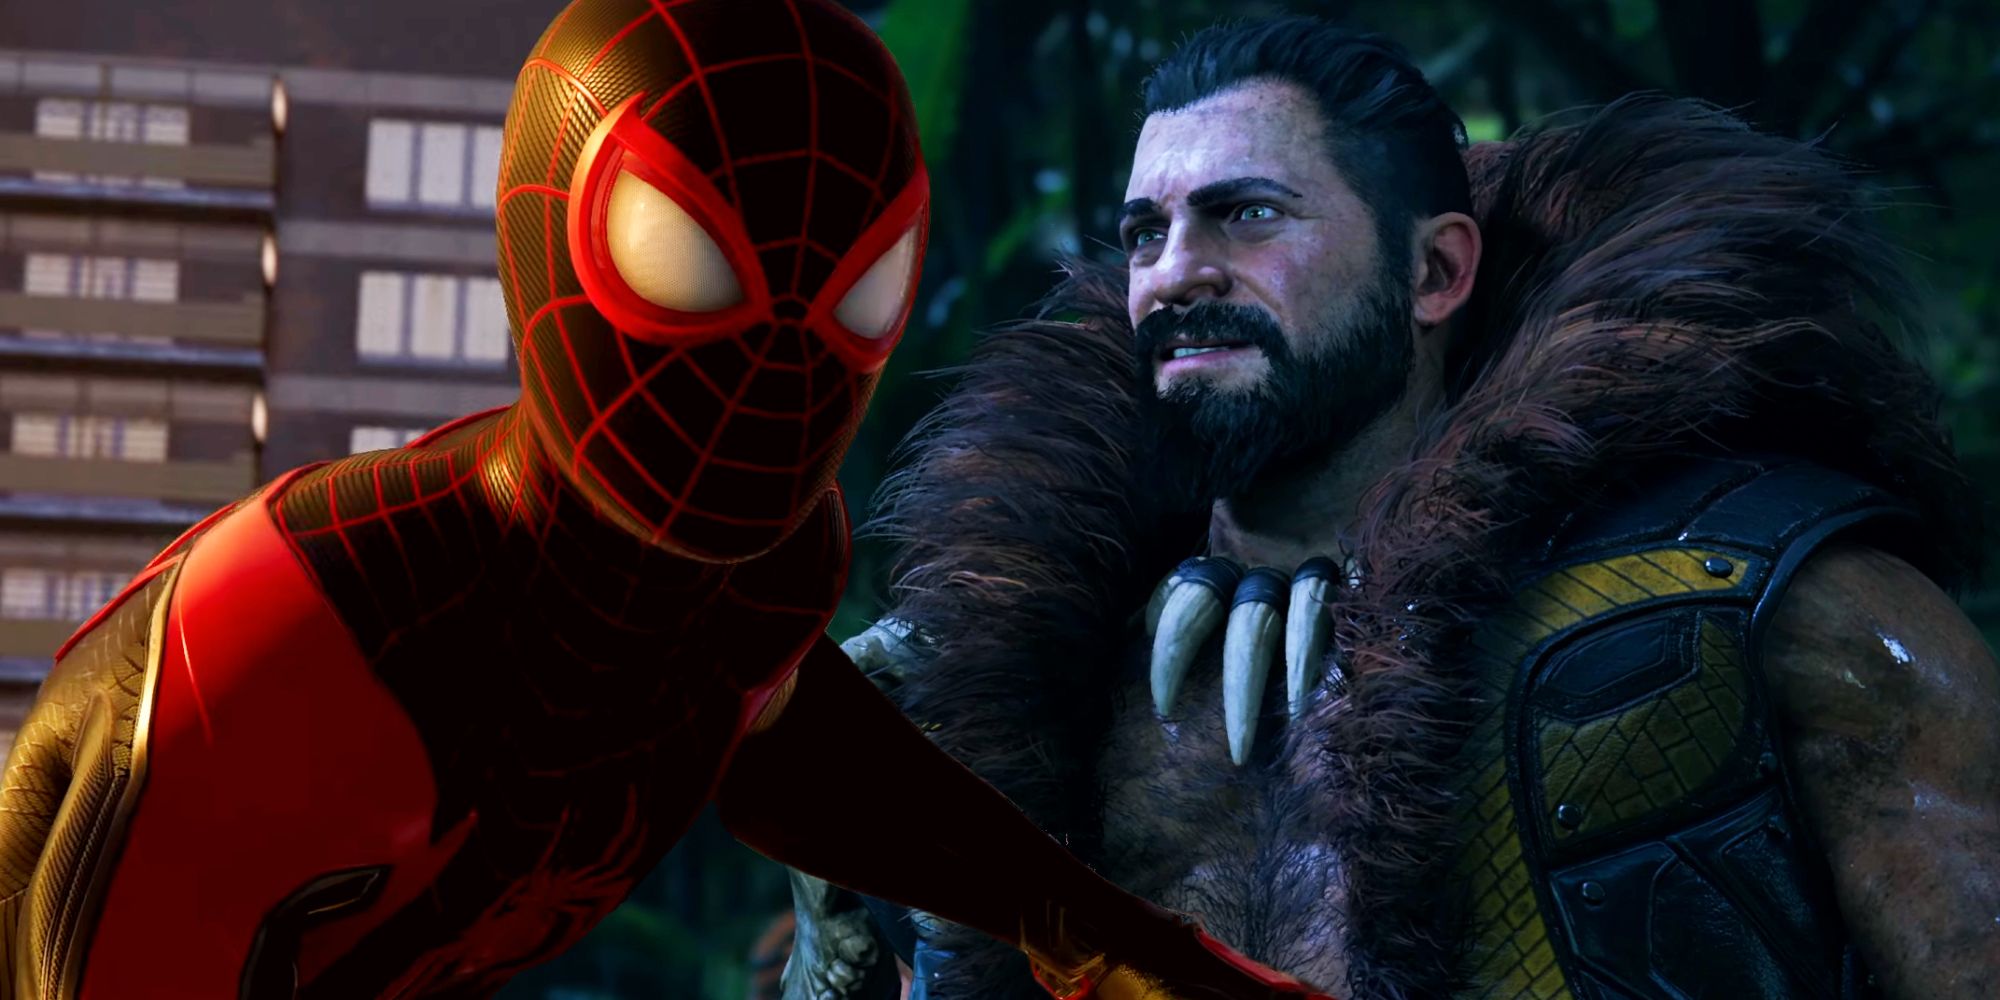 Miles Morales in his black and red Spider-Man suit superimposed on an image of Kraven the Hunter standing in a jungle, wearing a fur-lined vest and a necklace made of large fangs.